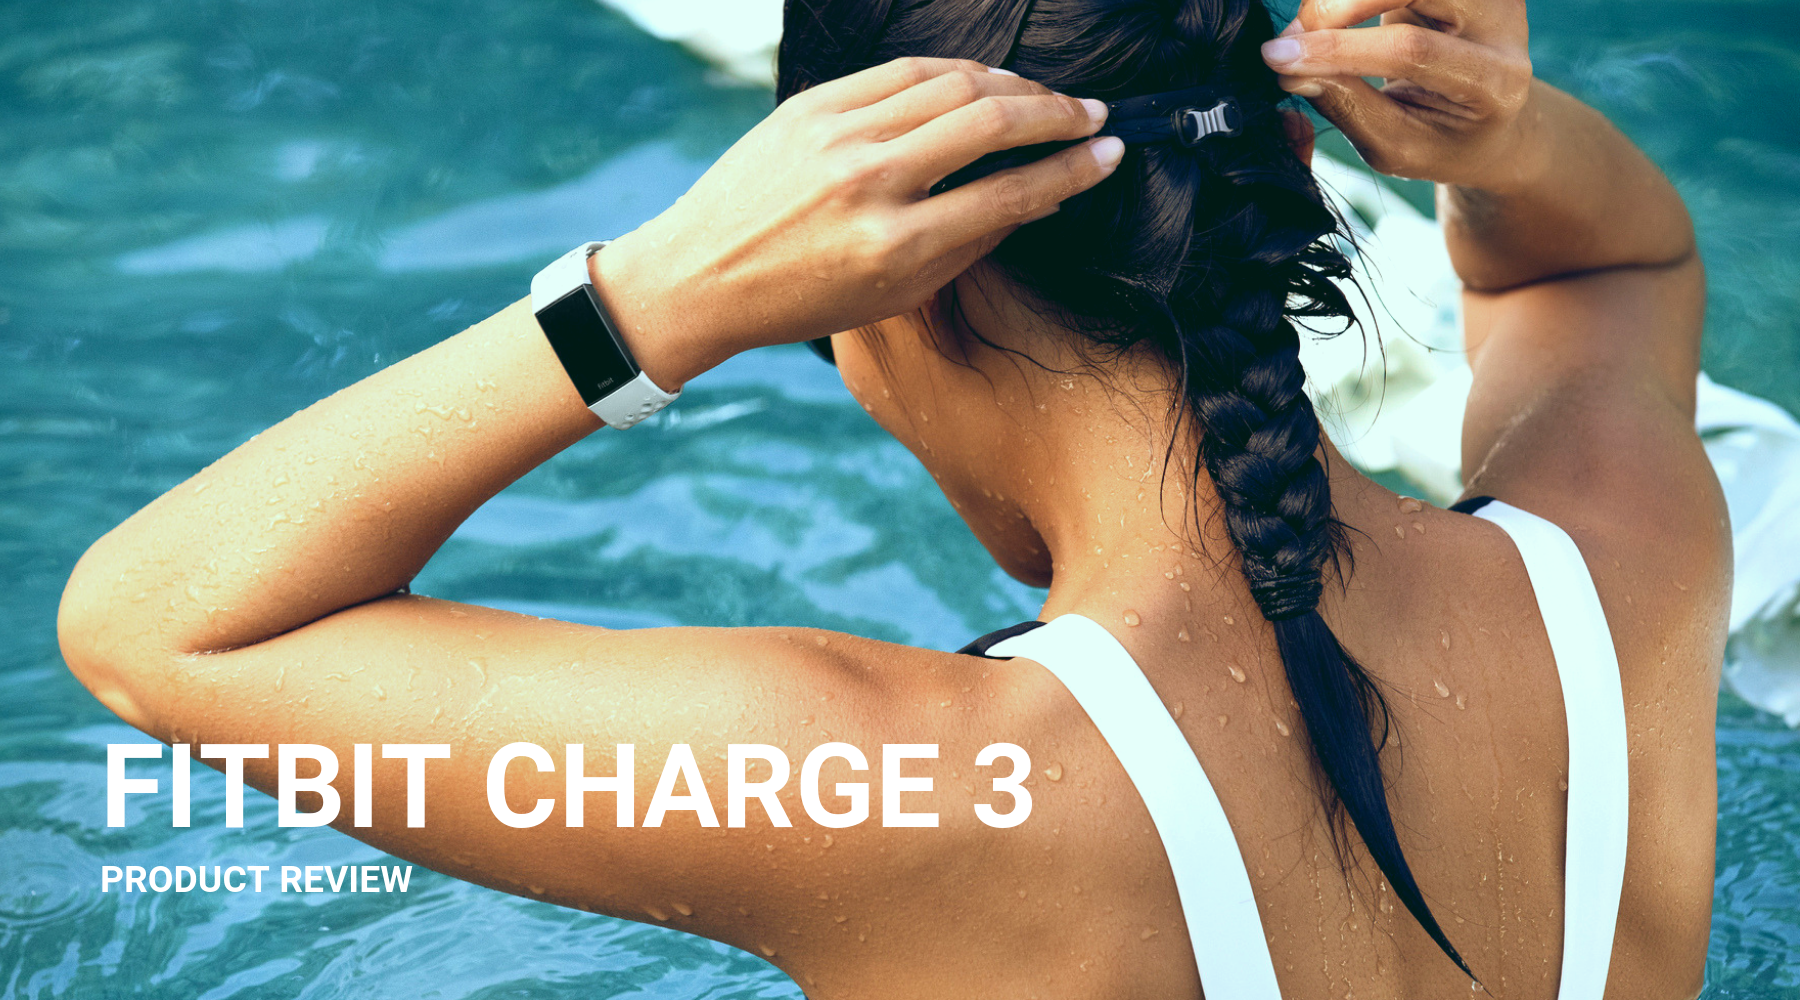 Fitbit Charge 2 or Charge 3? Should you upgrade?